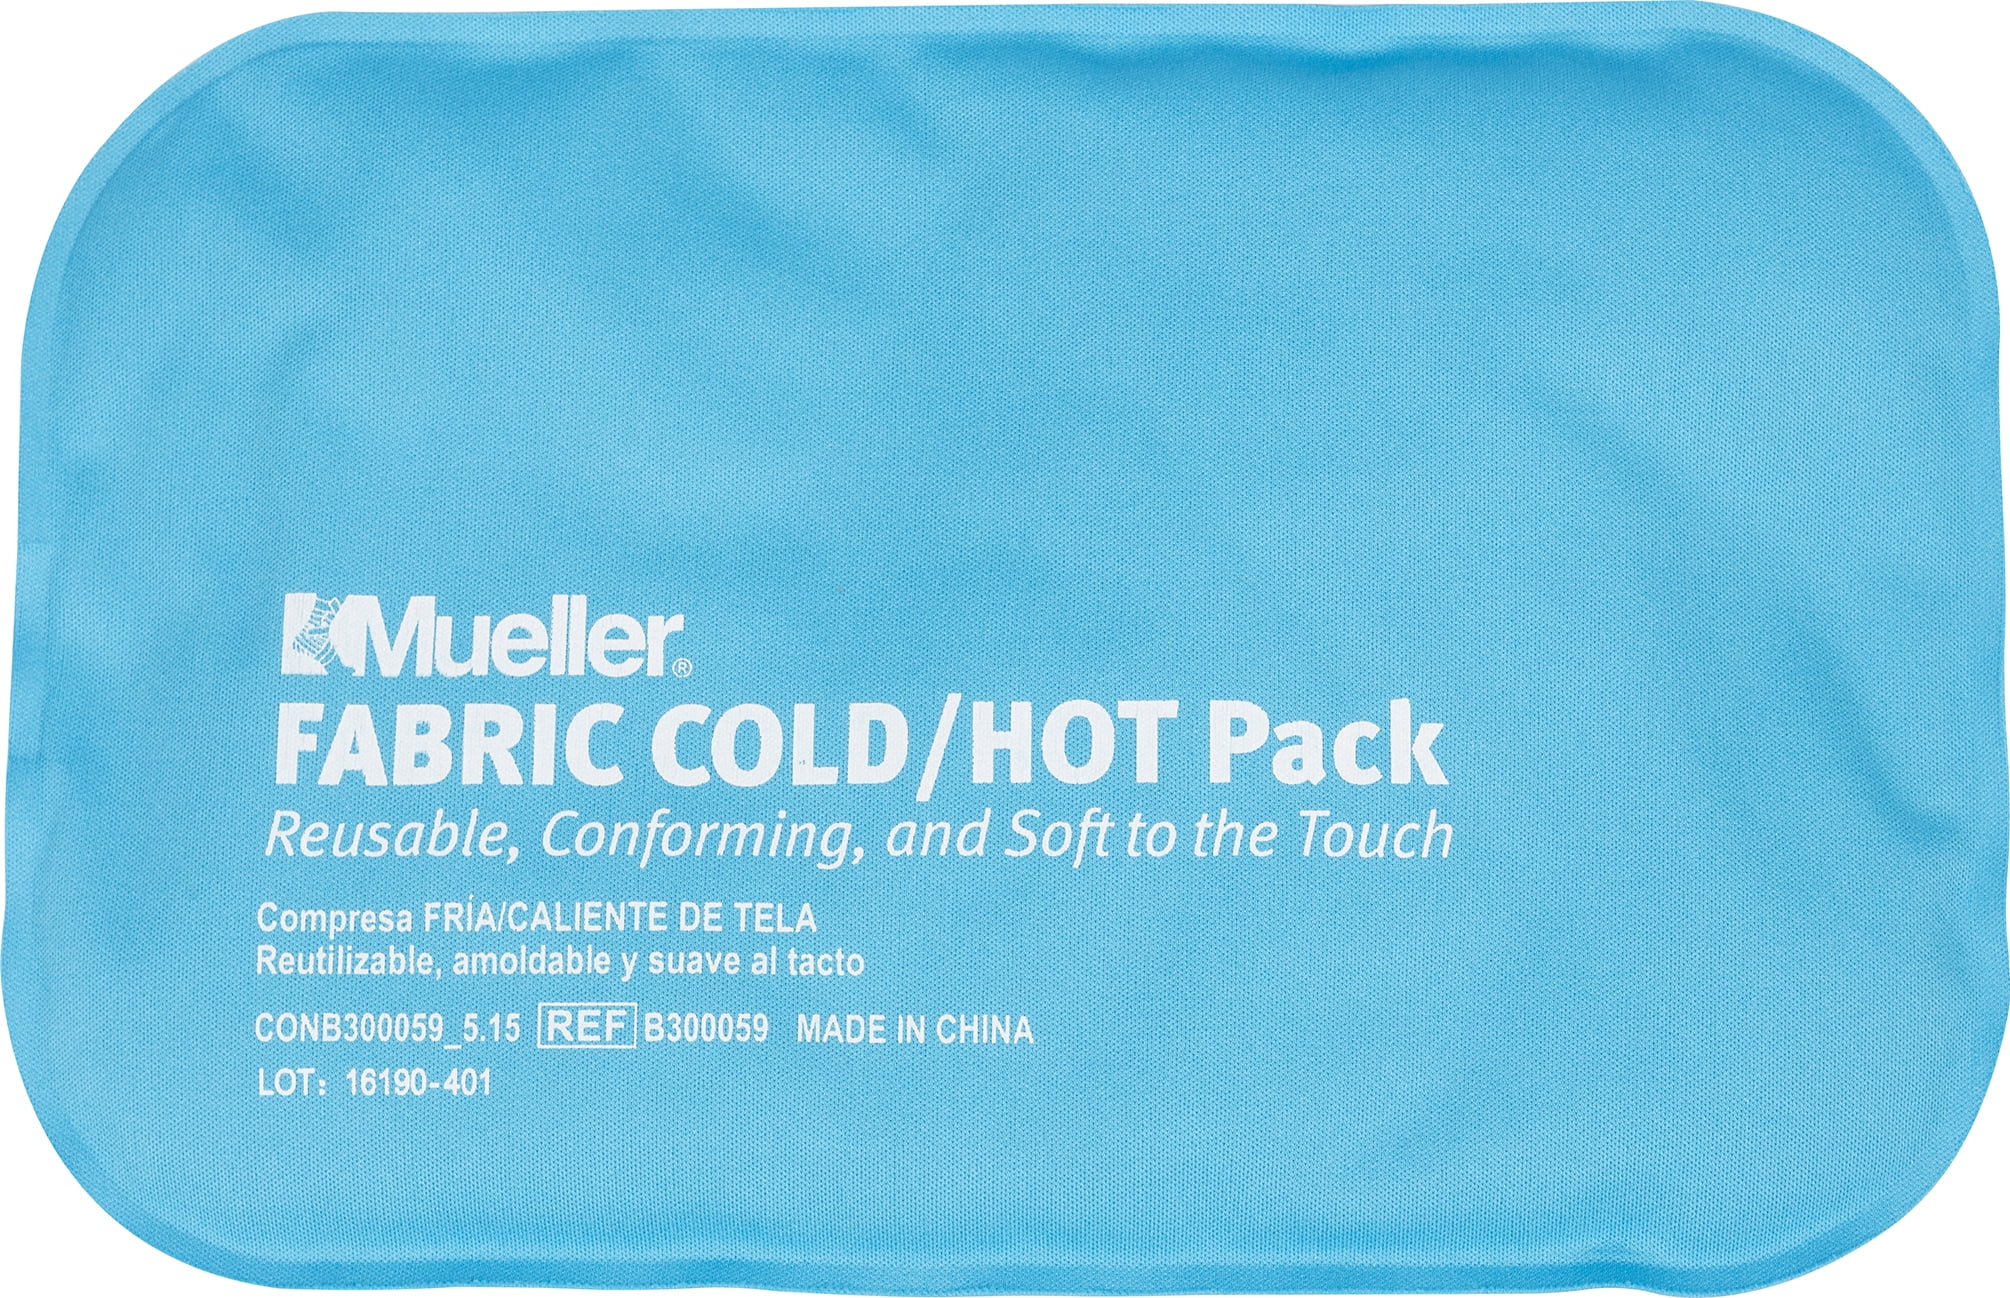 4.75x6 Case of 12 Mueller Reusable Cold/Hot Pack